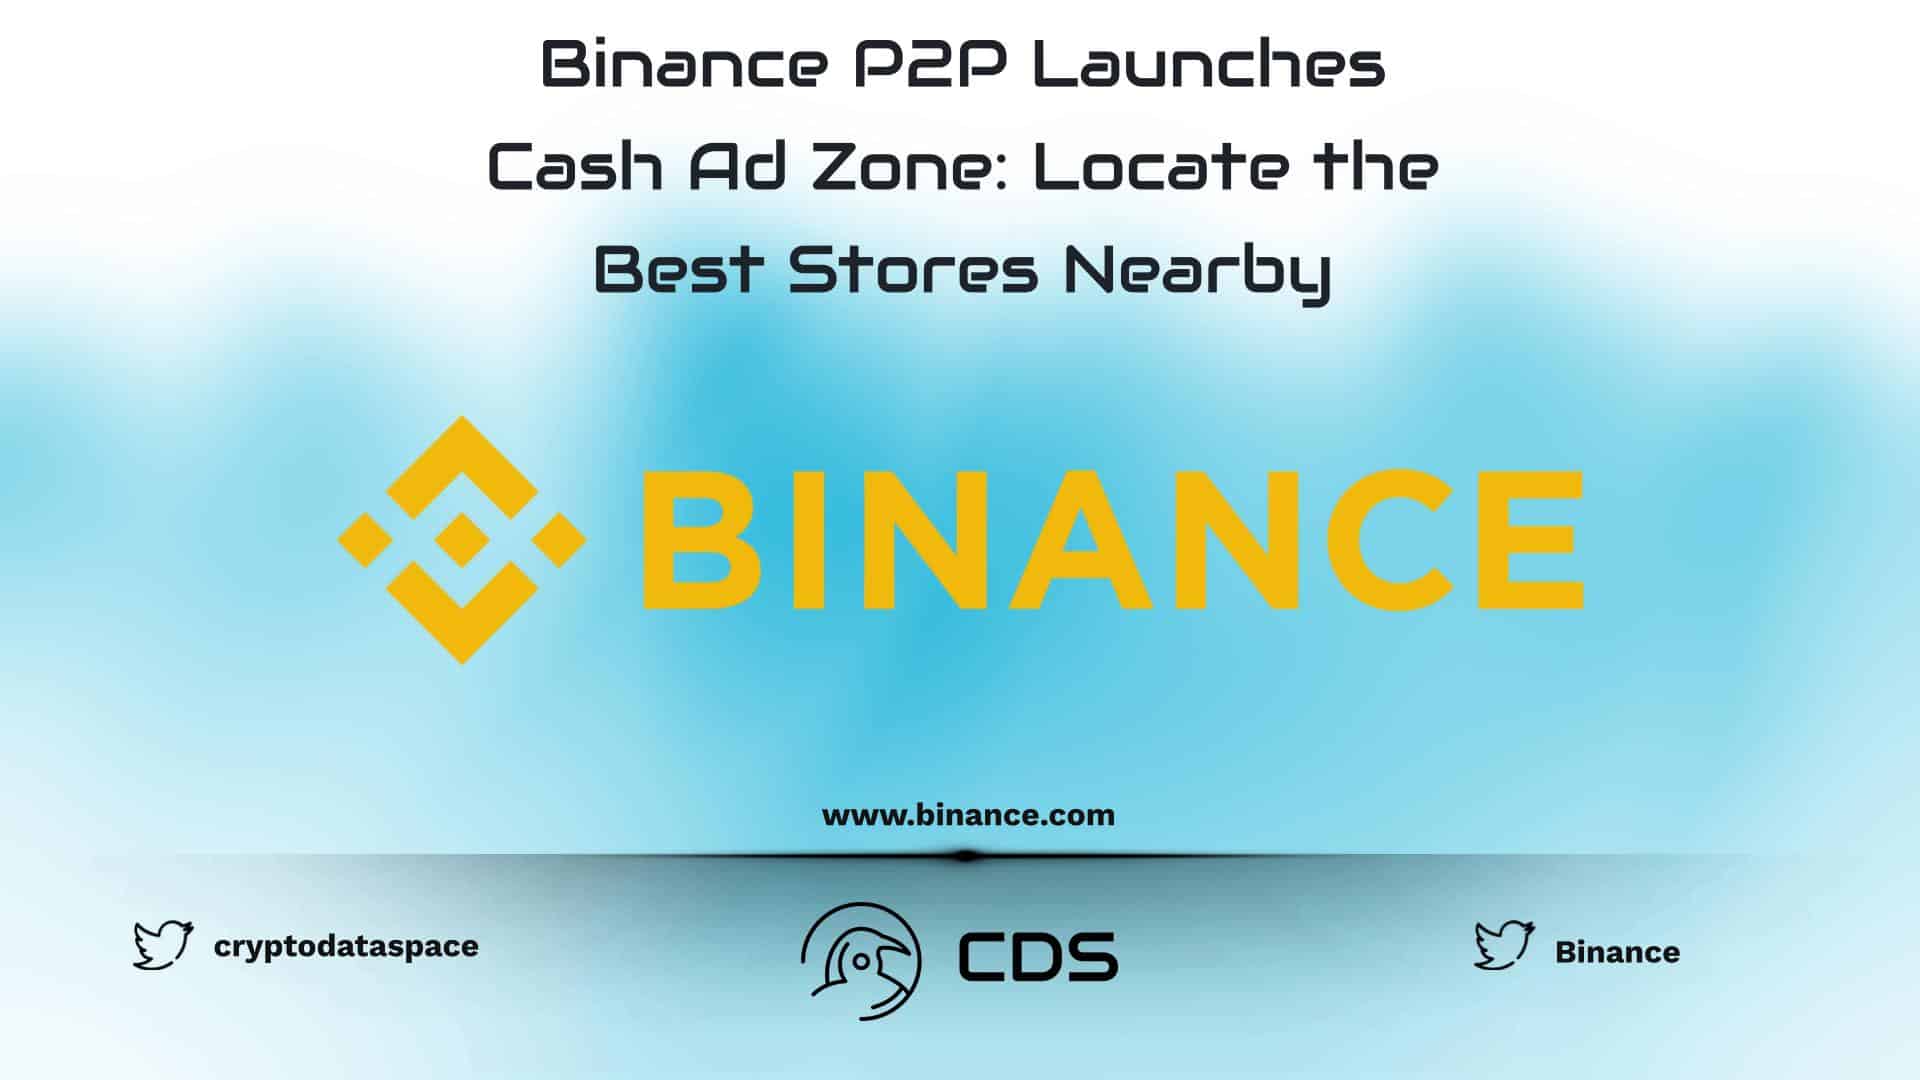 Binance P2P Launches Cash Ad Zone Locate the Best Stores Nearby